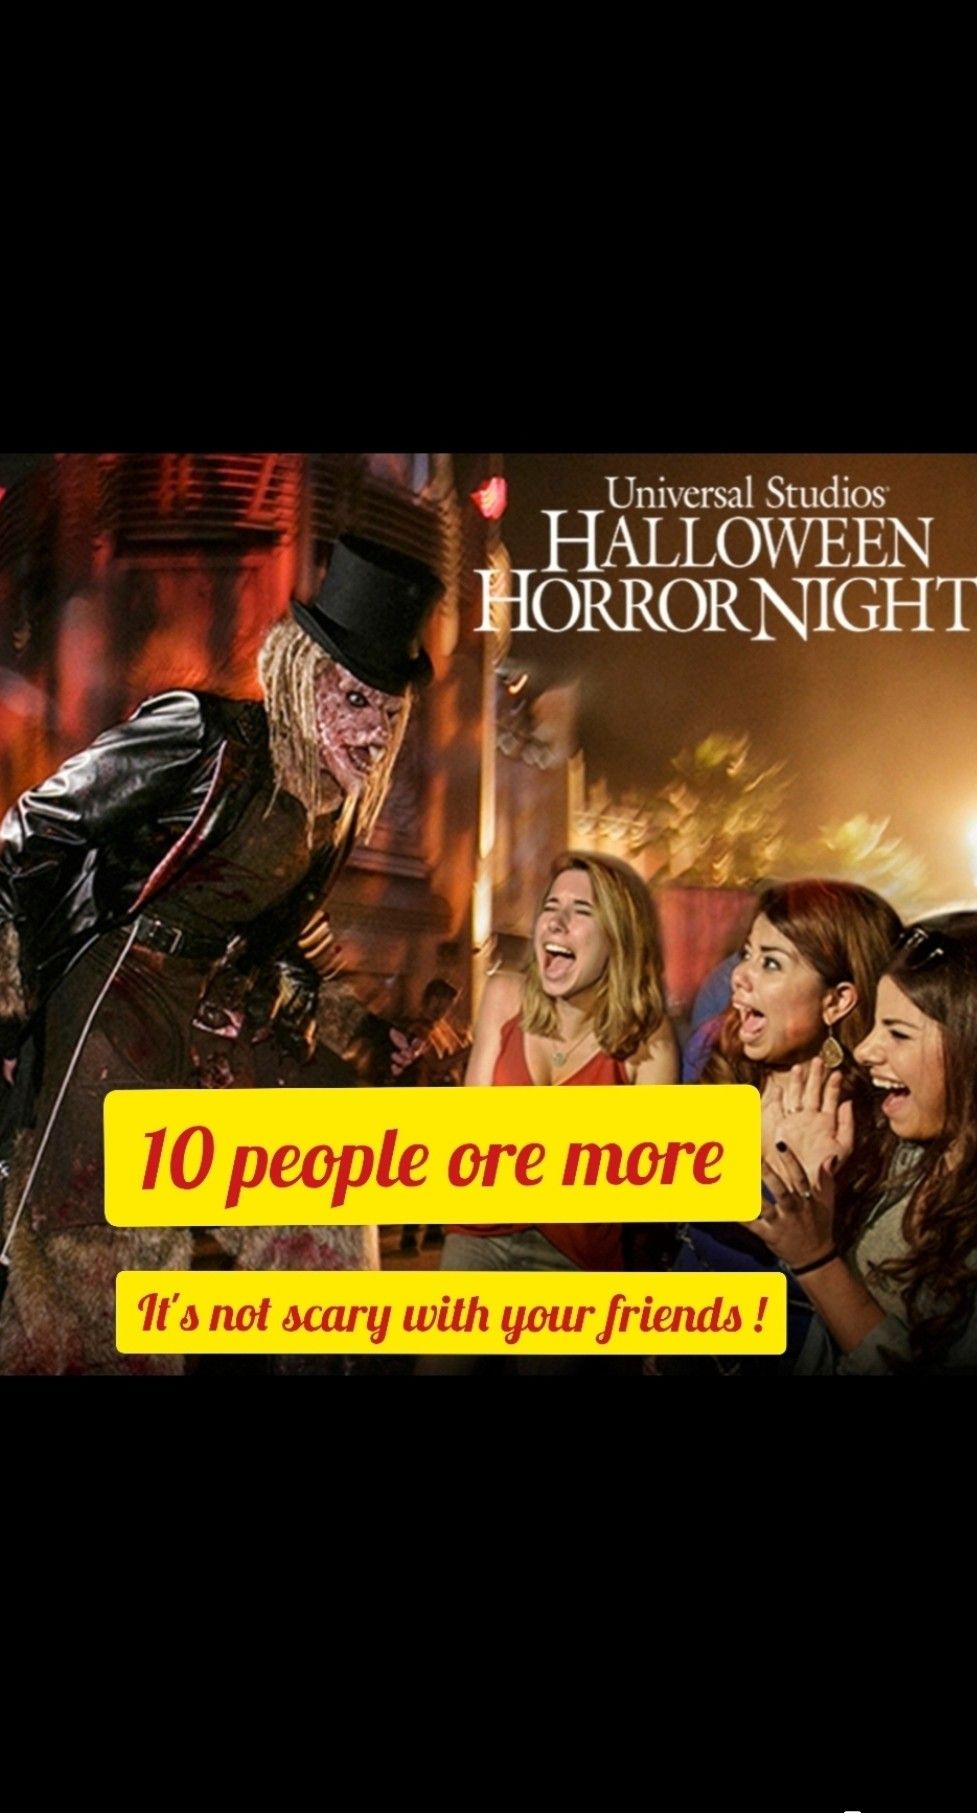 Tickets. Horror night . 10 . For today . Pay after enter.